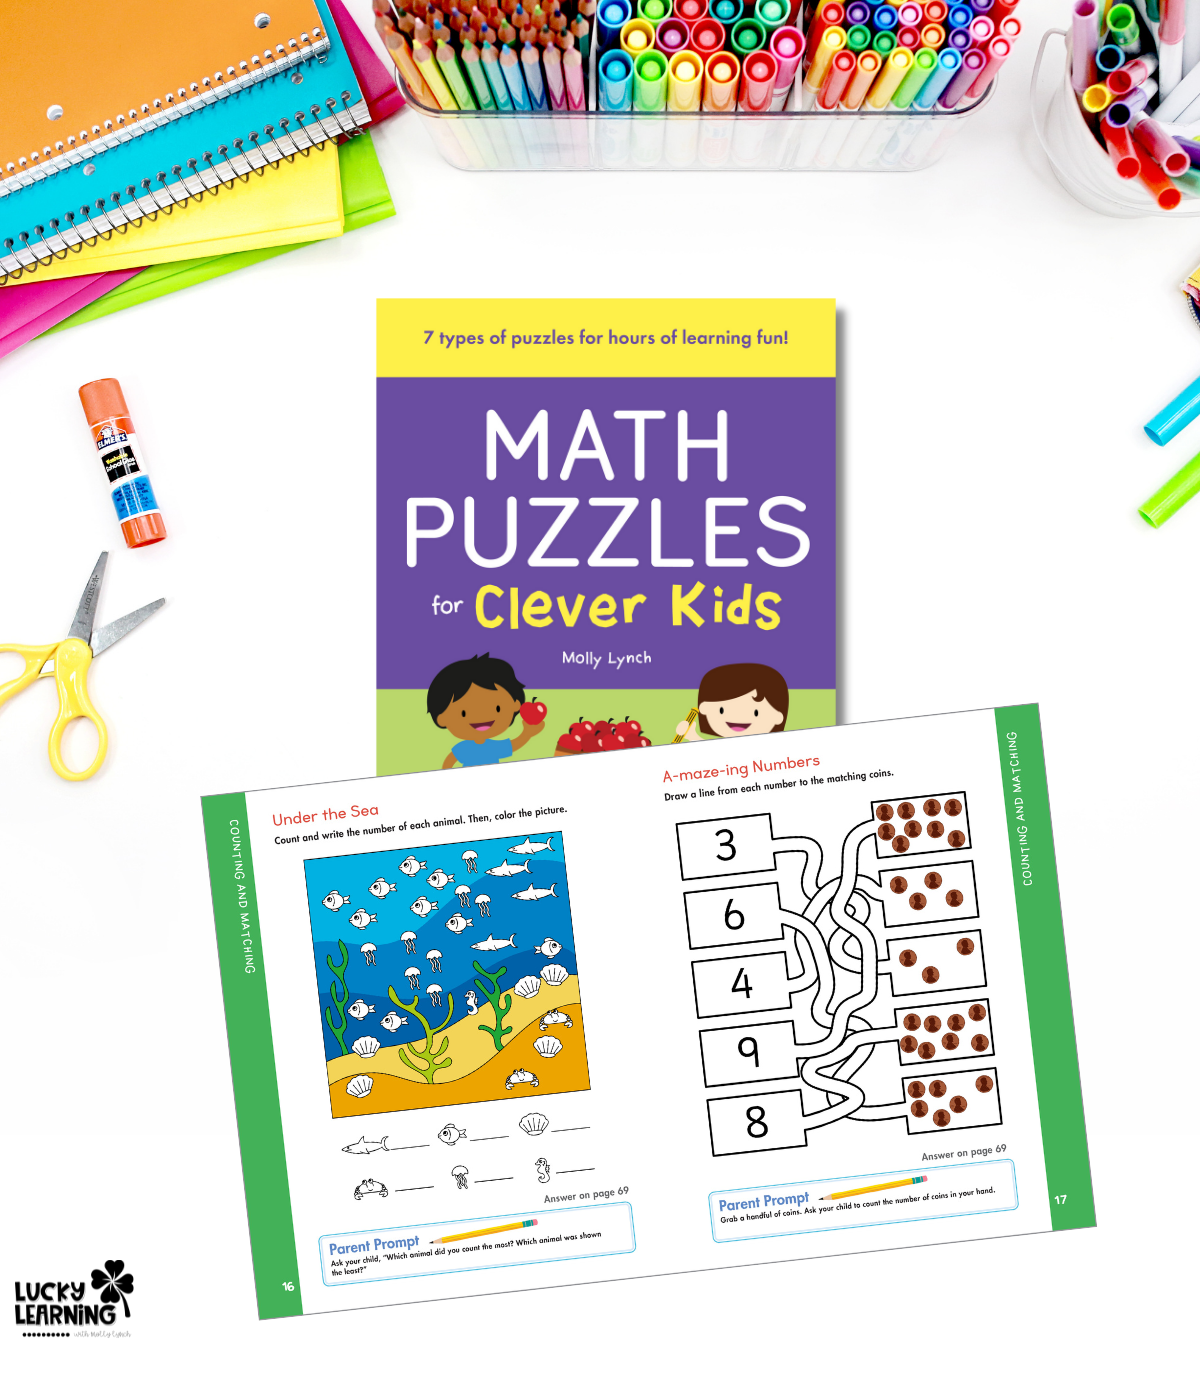 example of pages from the math puzzles for clever kids book | Lucky Learning with Molly Lynch